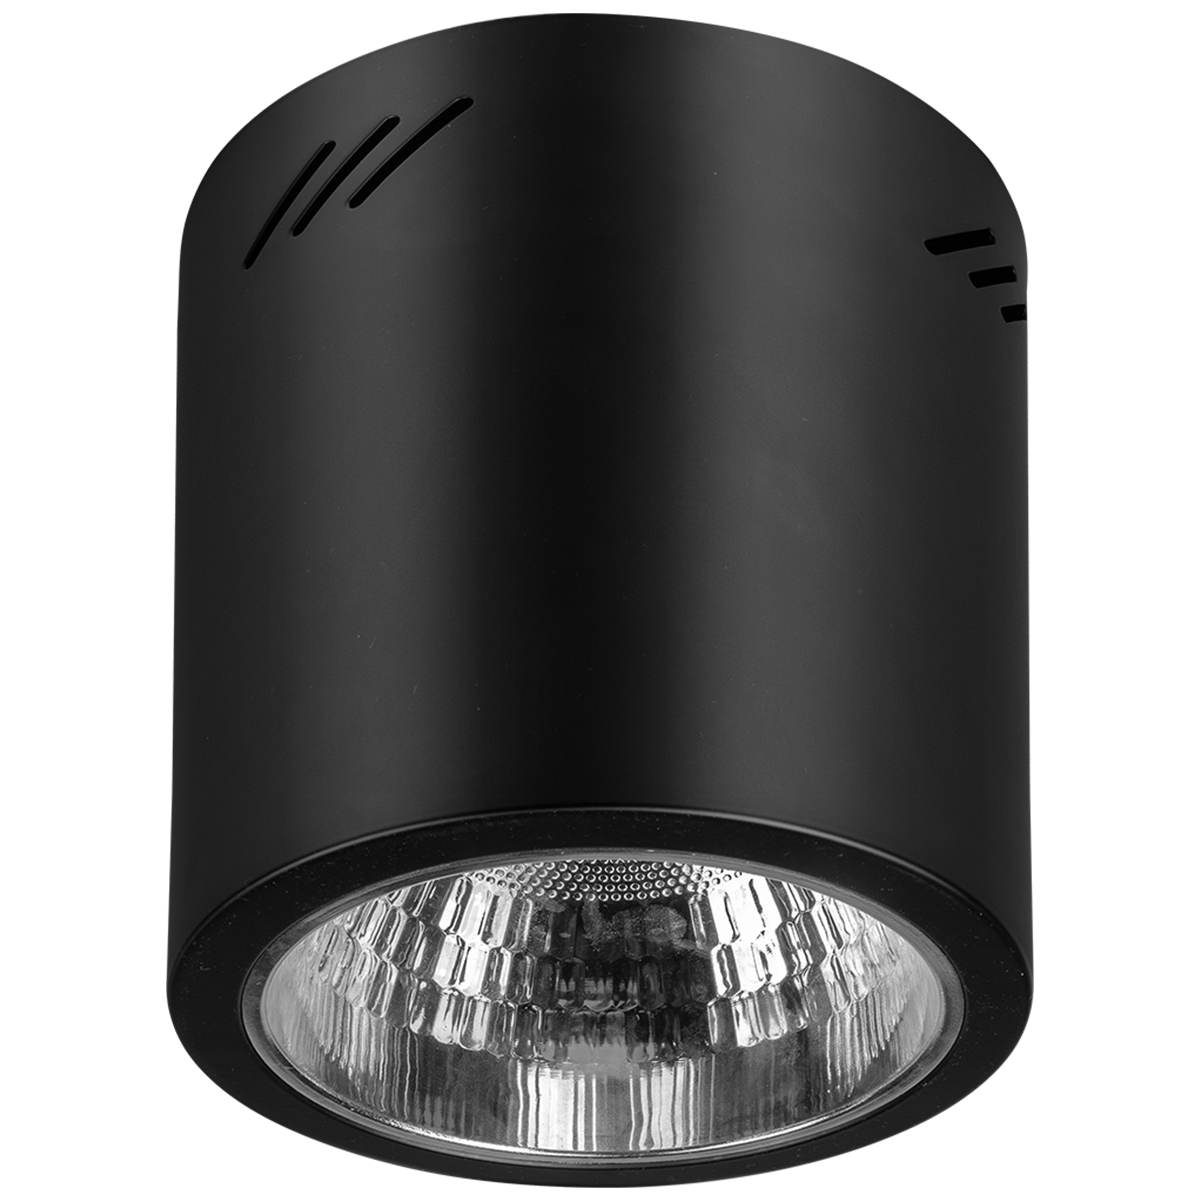 Firefly Round Surface Mounted Downlight Fixture